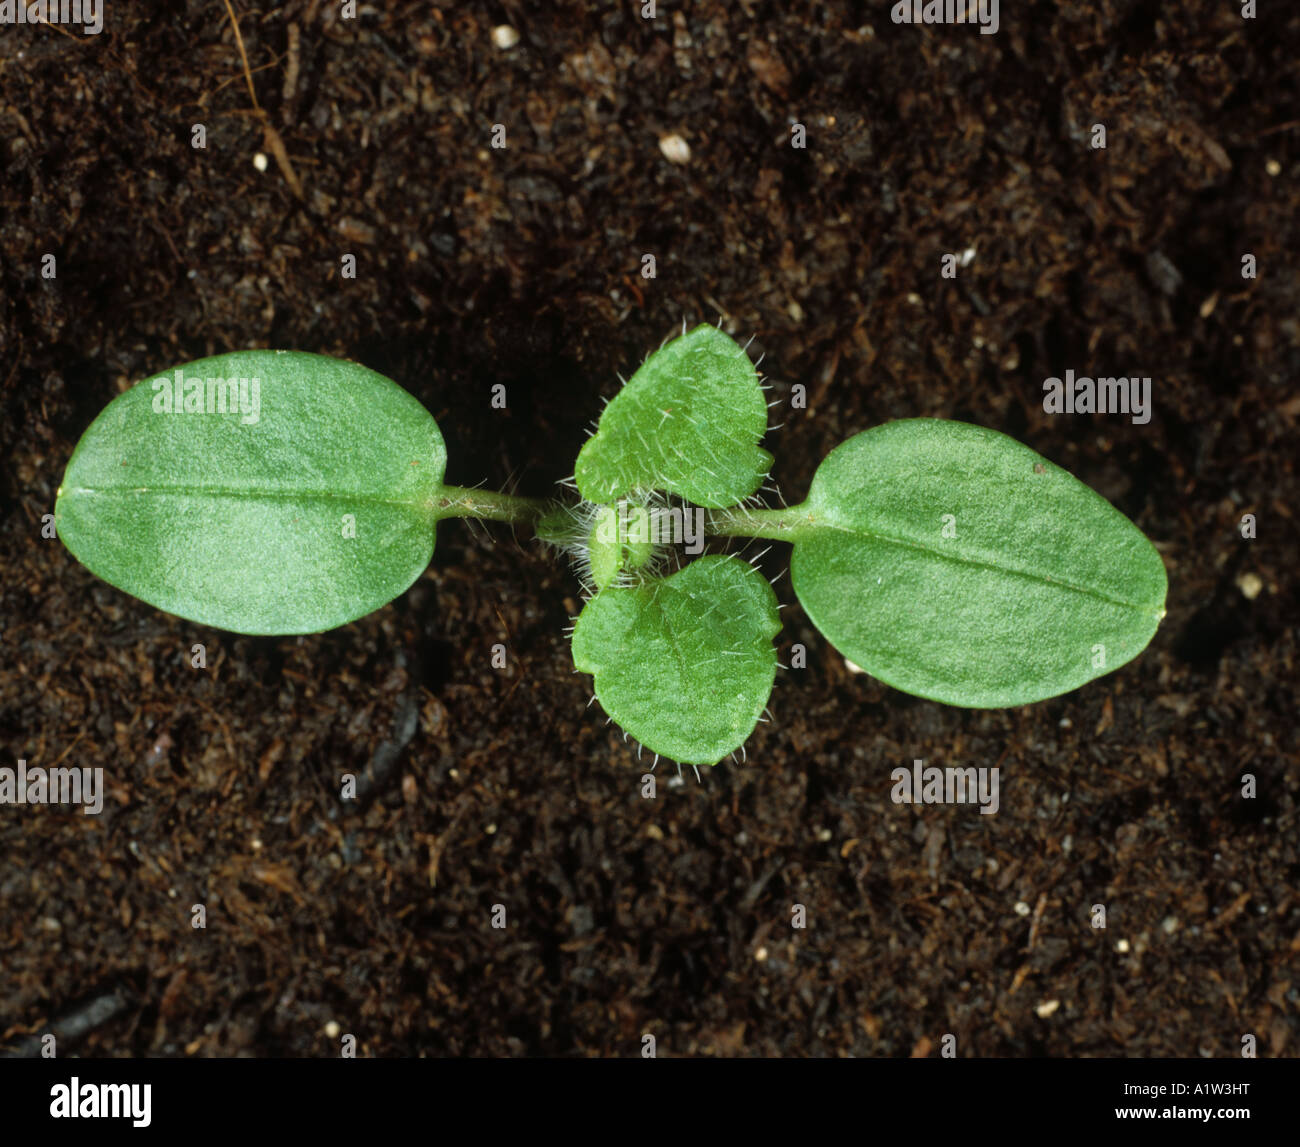 Ivy leaved speedwell Veronica hederifolia seedling cotyledons with true leaves beginning to grow Stock Photo